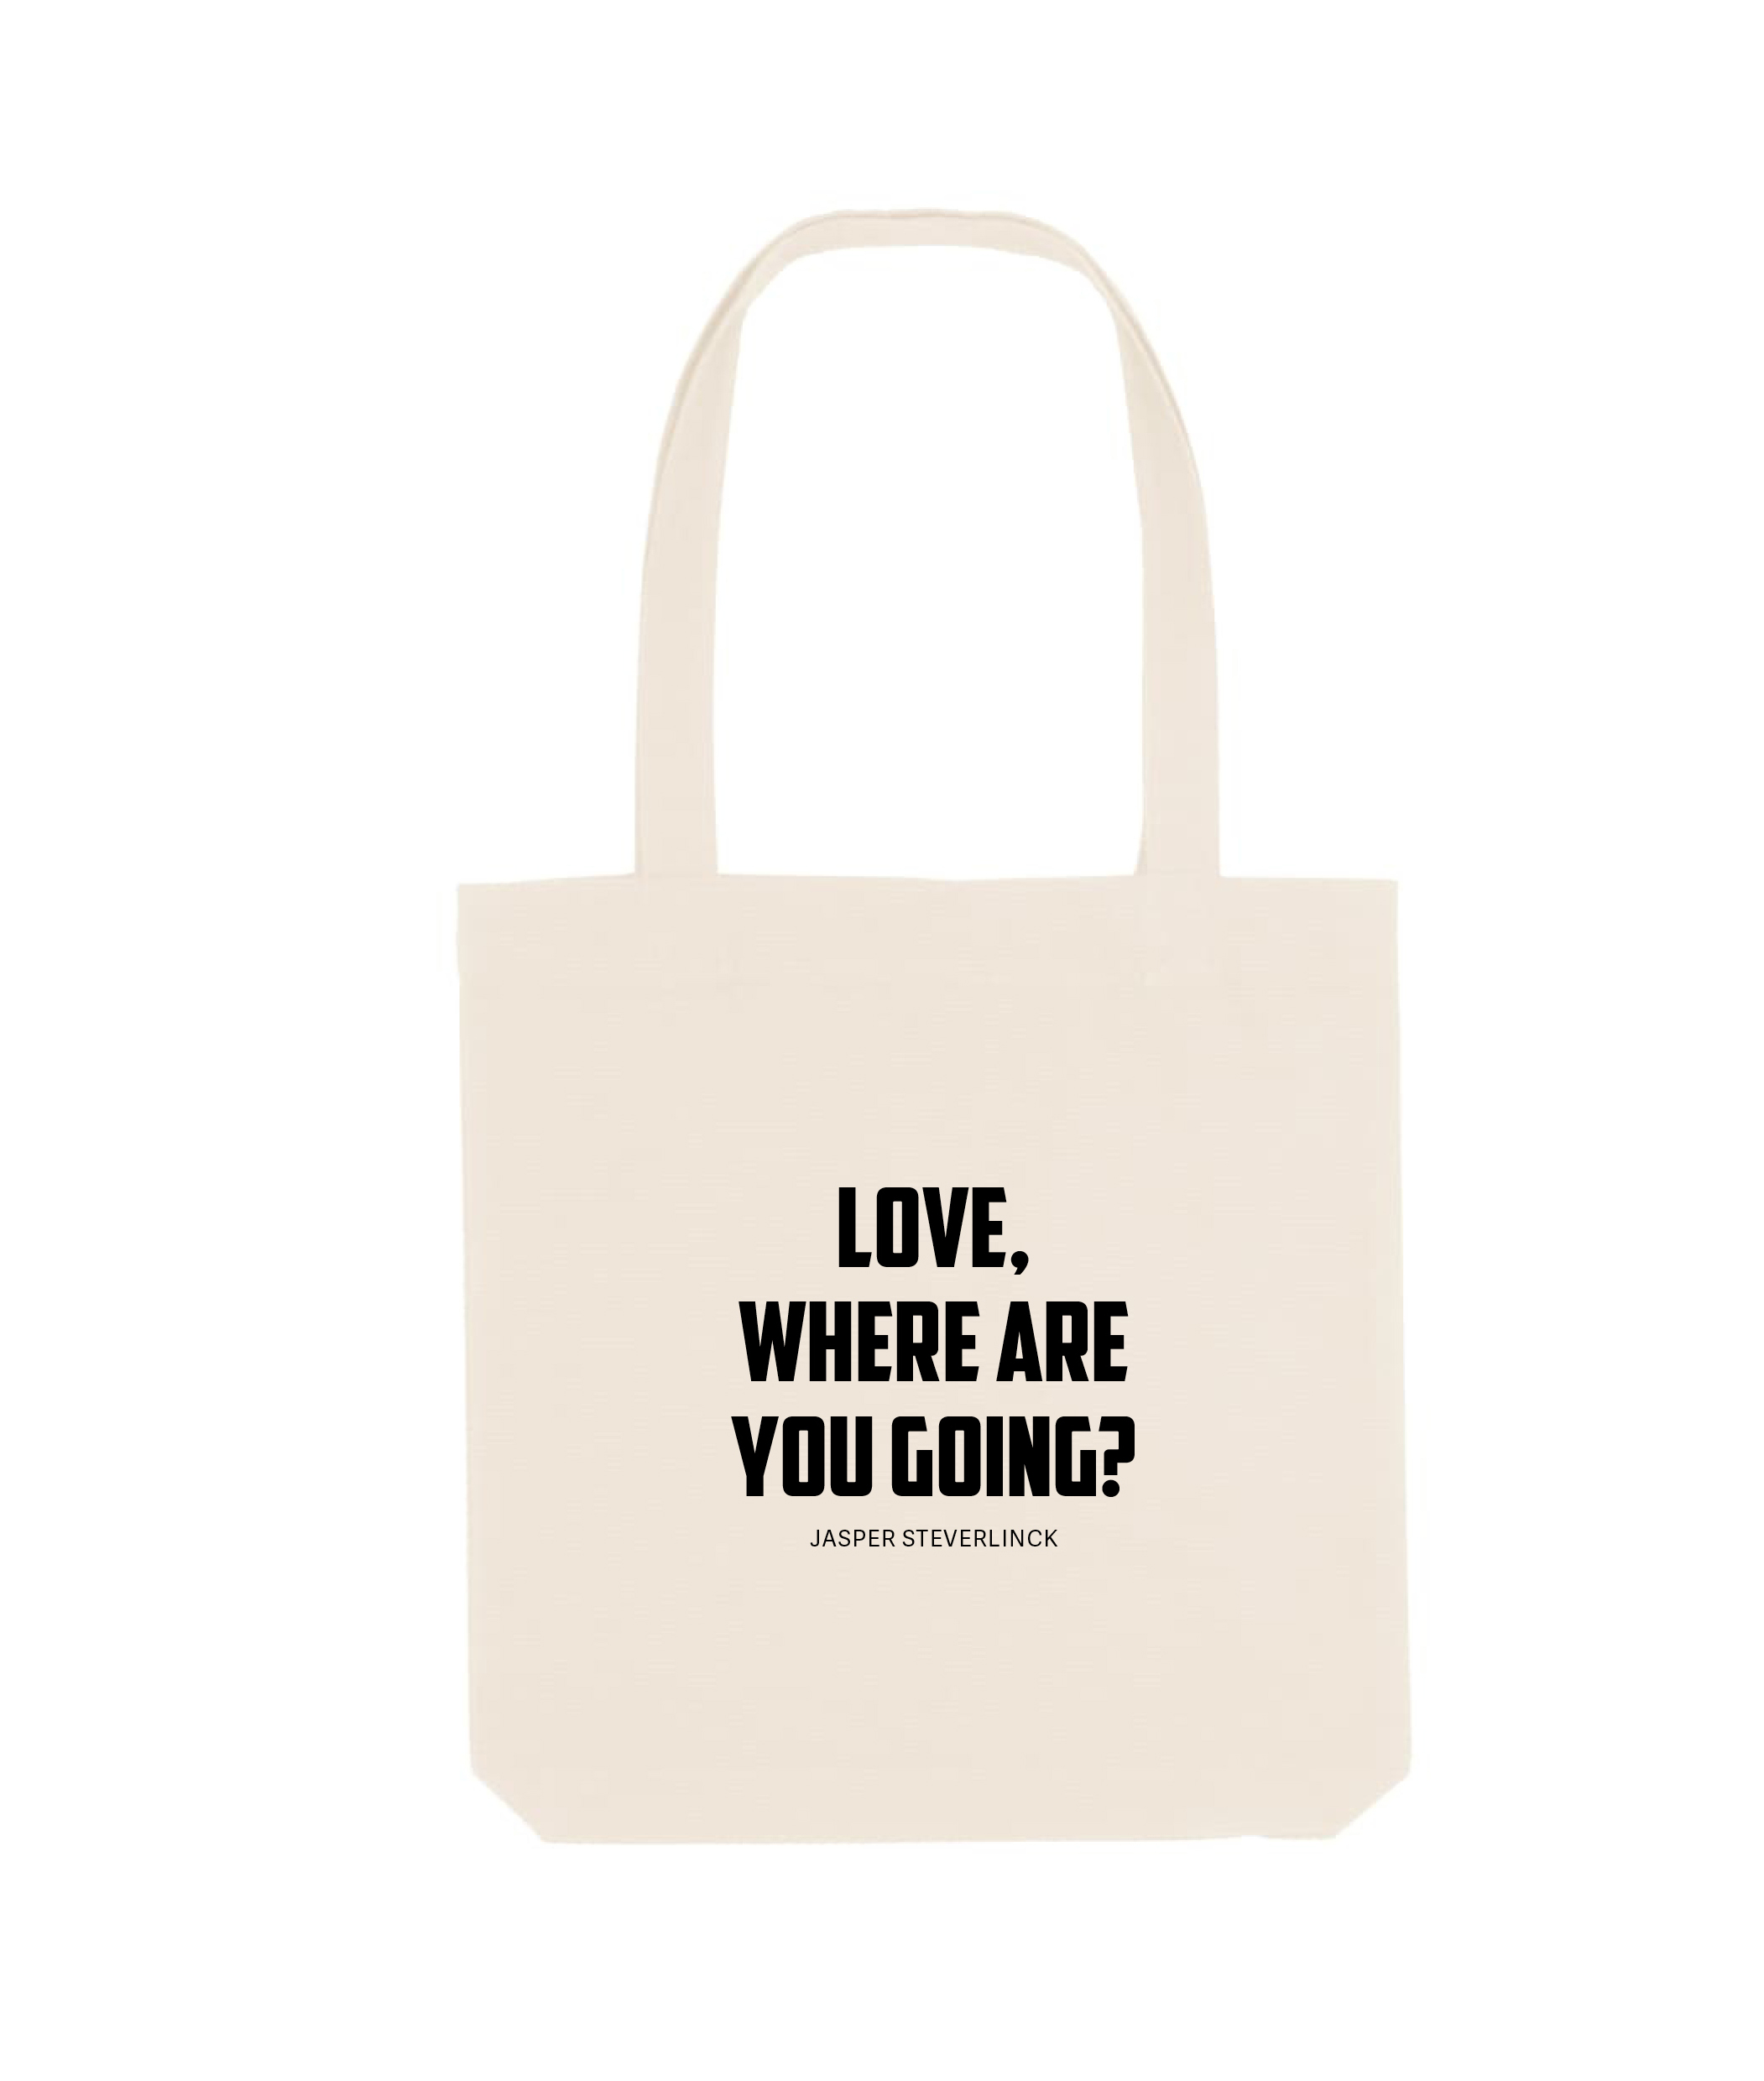 Totebag Love where are you going